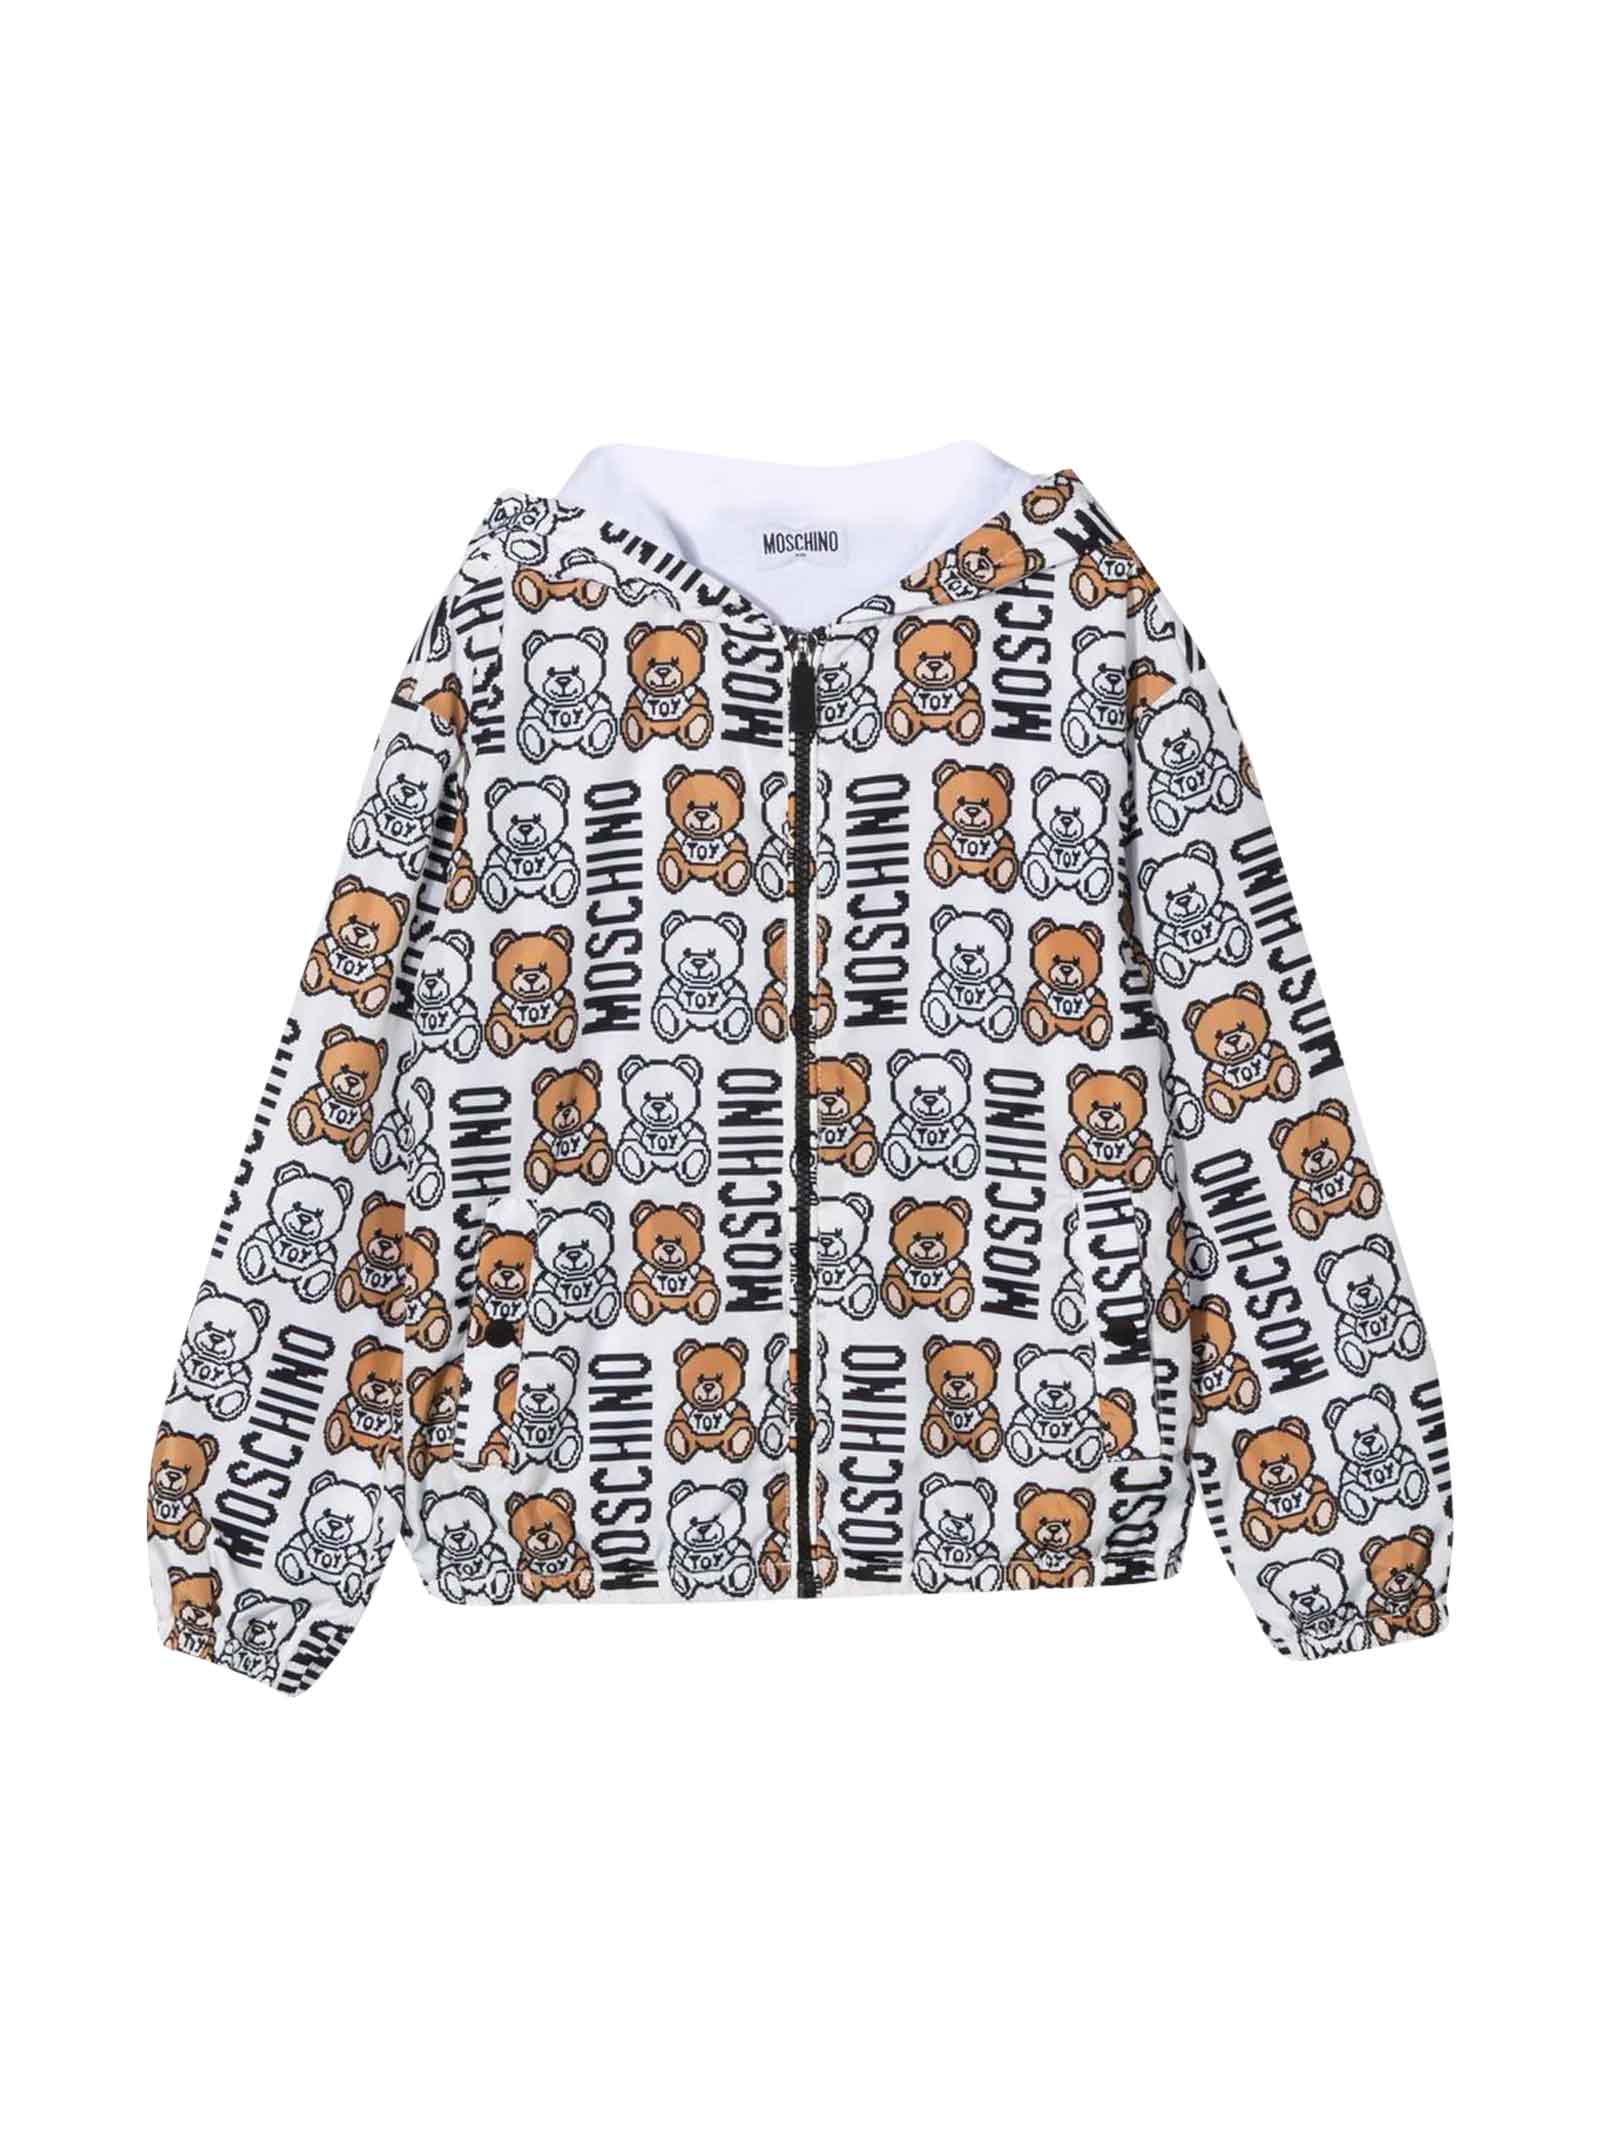 Moschino White Lightweight Jacket With Toy Print, Hood And Zip